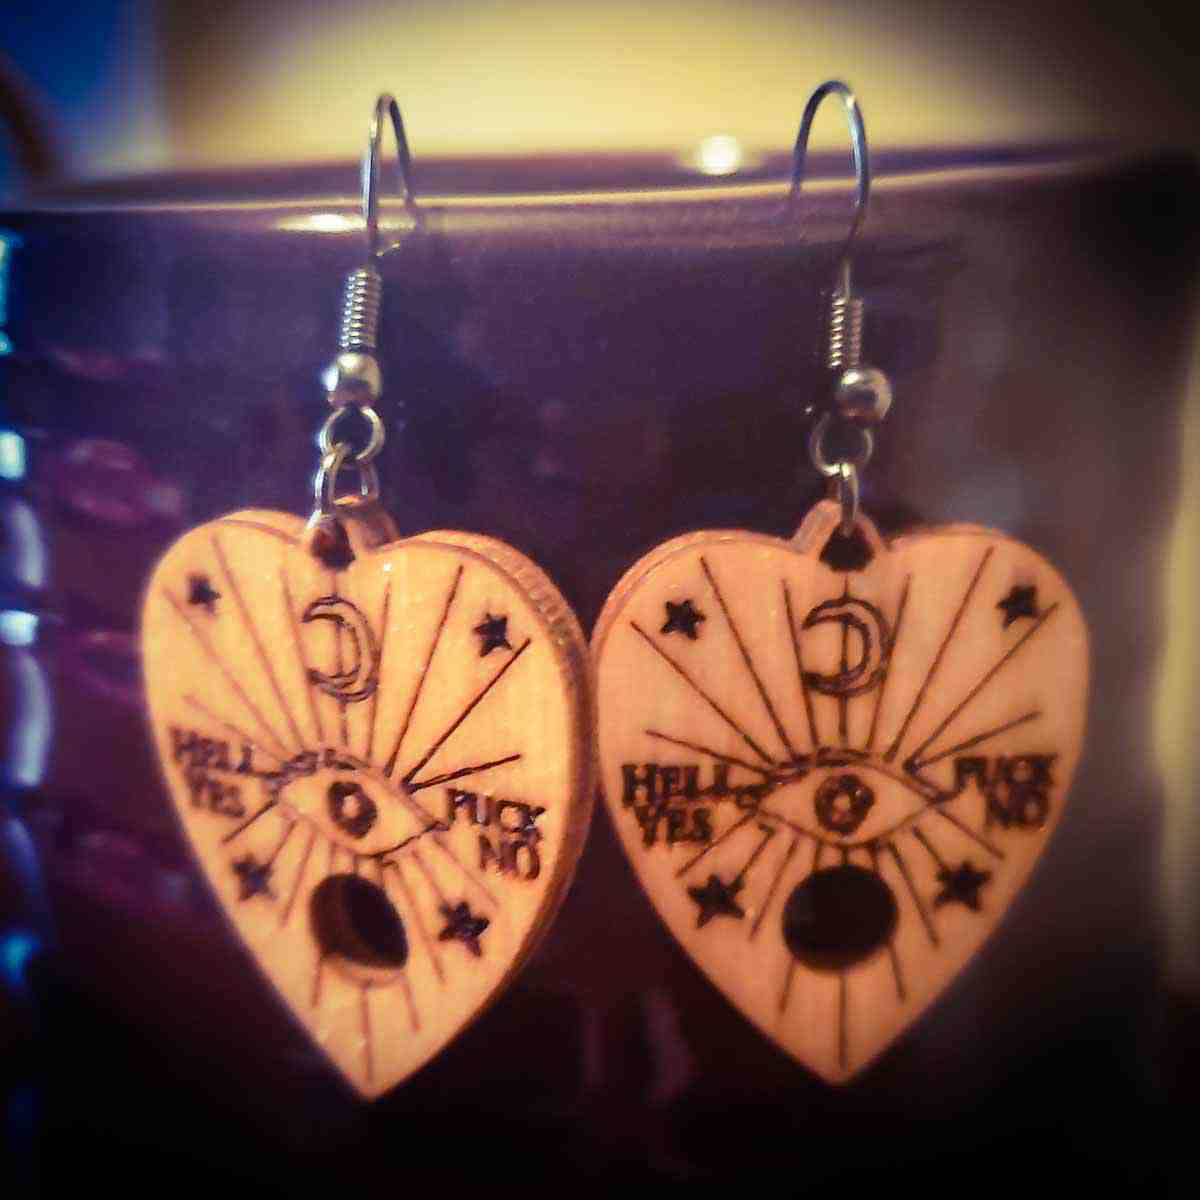 Melasdesign, witchy things, cheap, earrings, gothic, style, fashion, jewelry, occult, Thomas WV